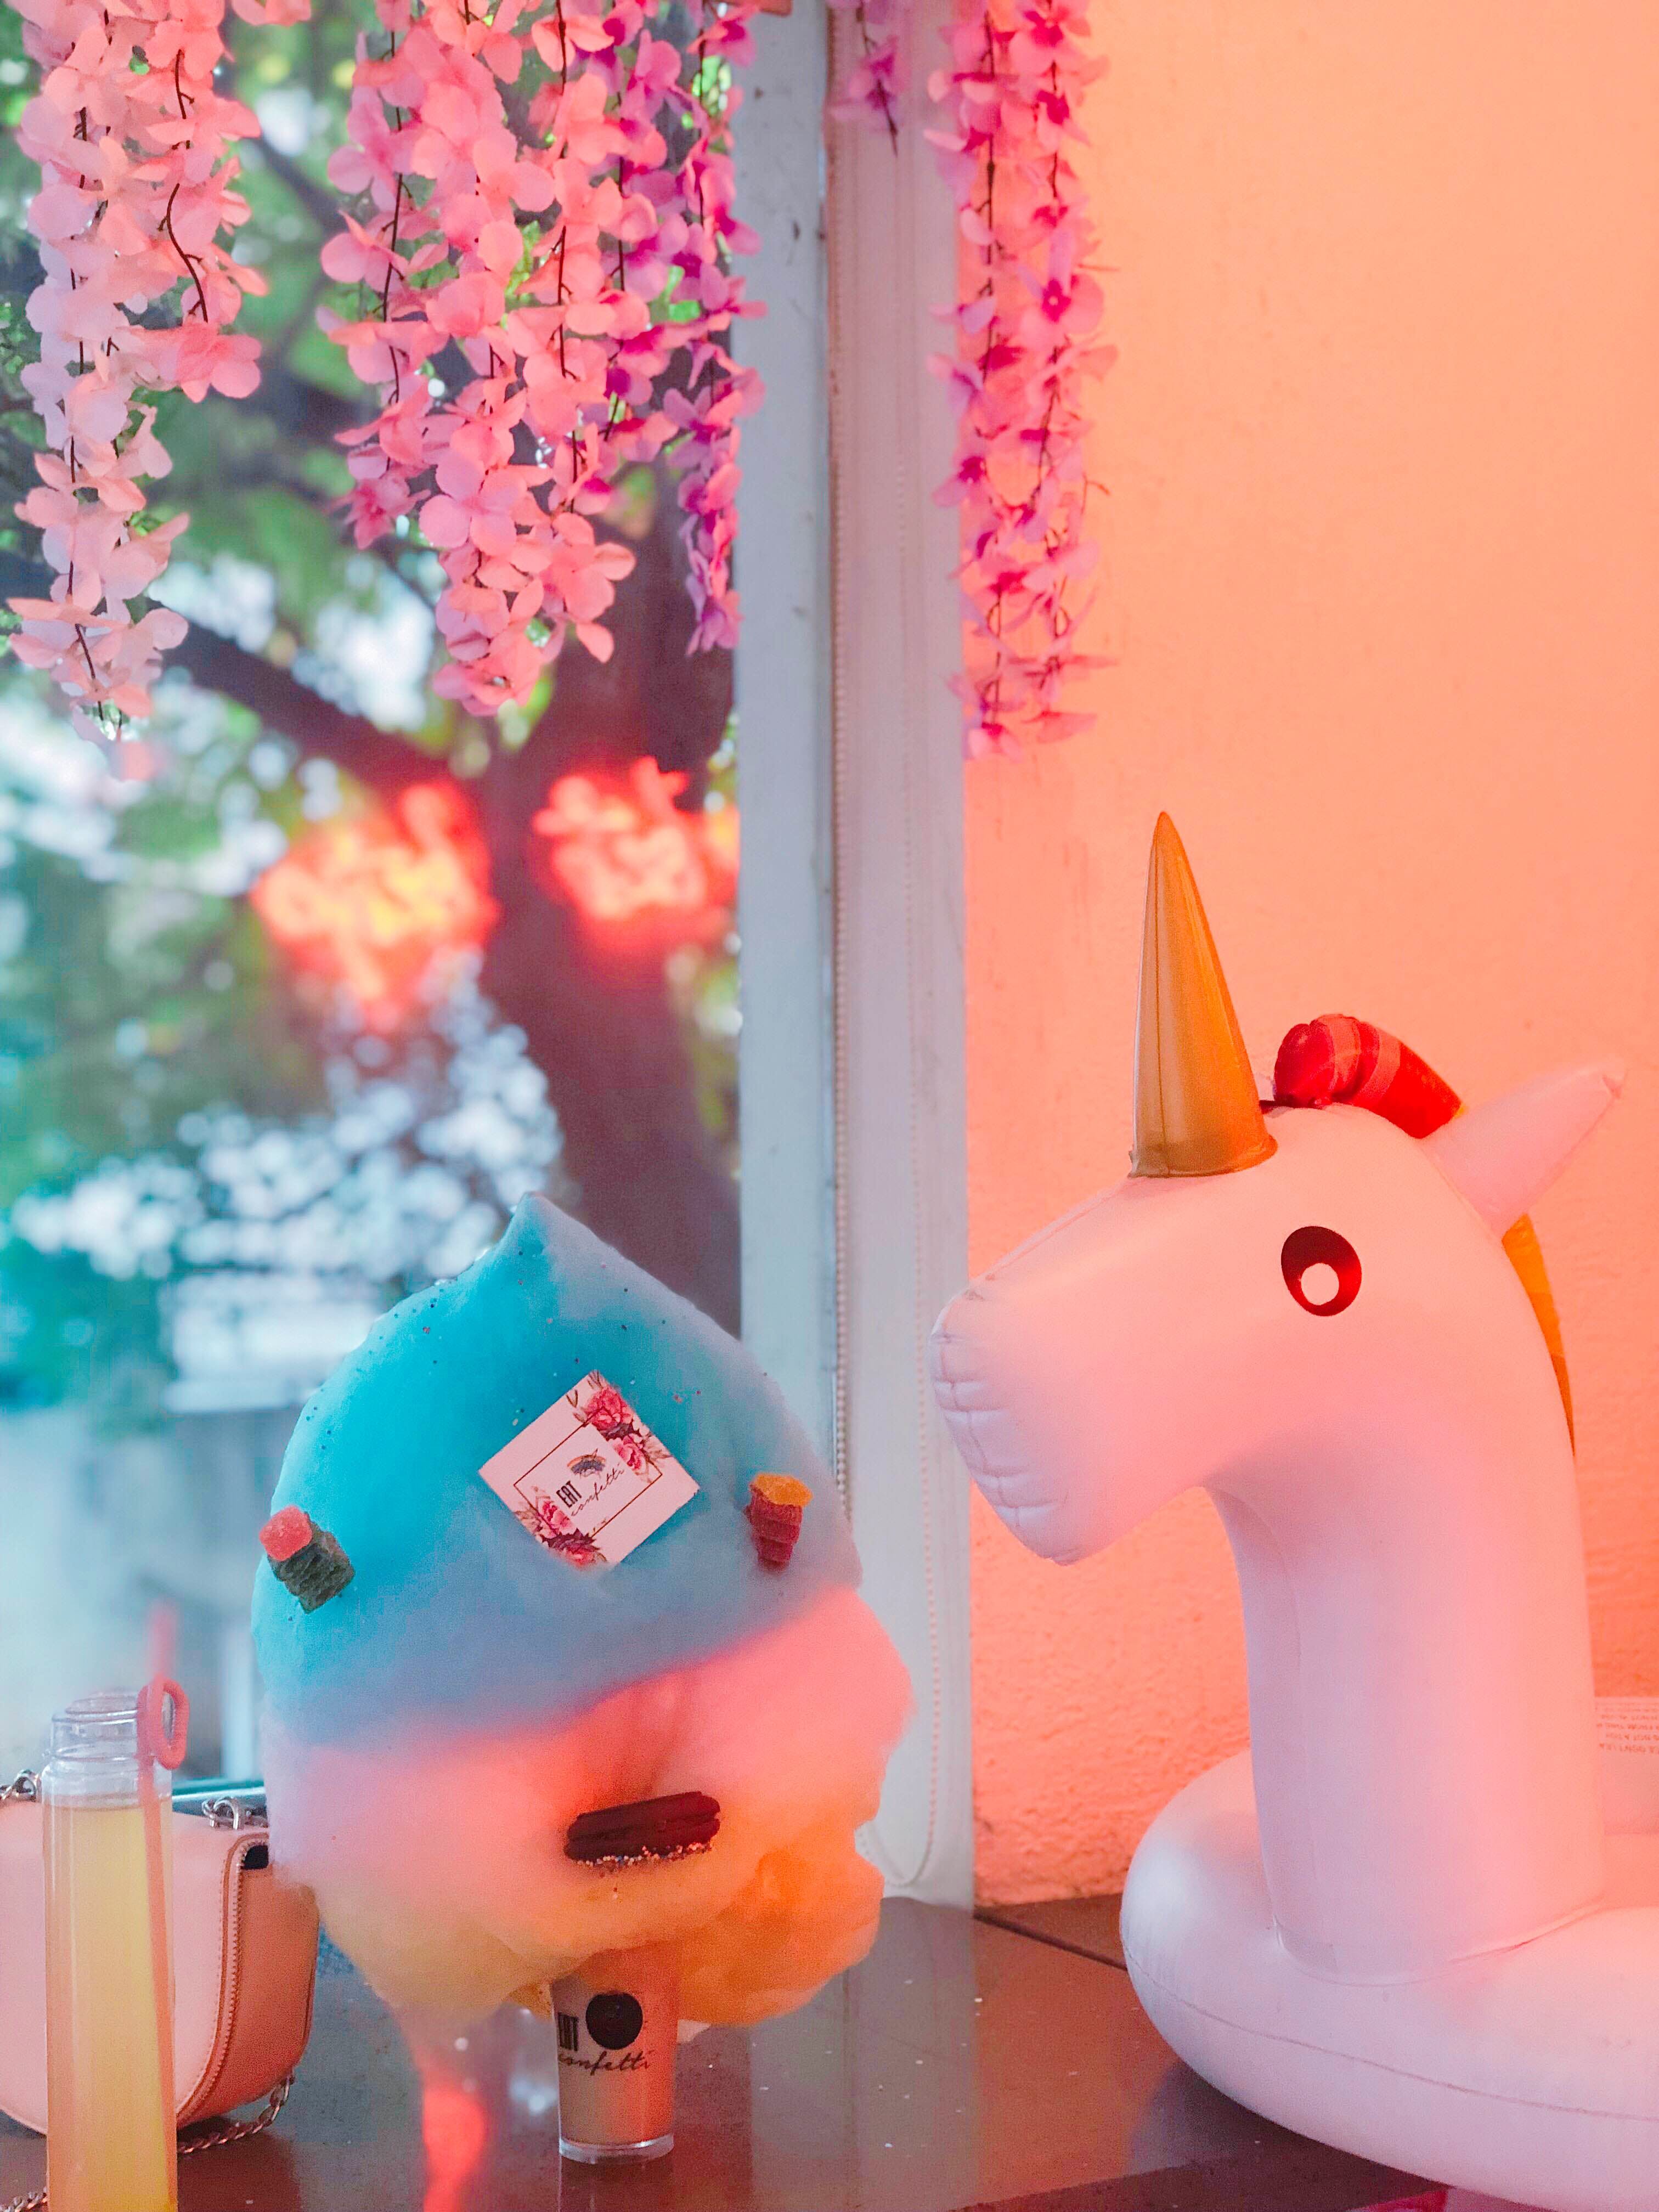 Love All Things Confetti, Candy Floss And Unicorn ? 
Head Over To Eat Confetti